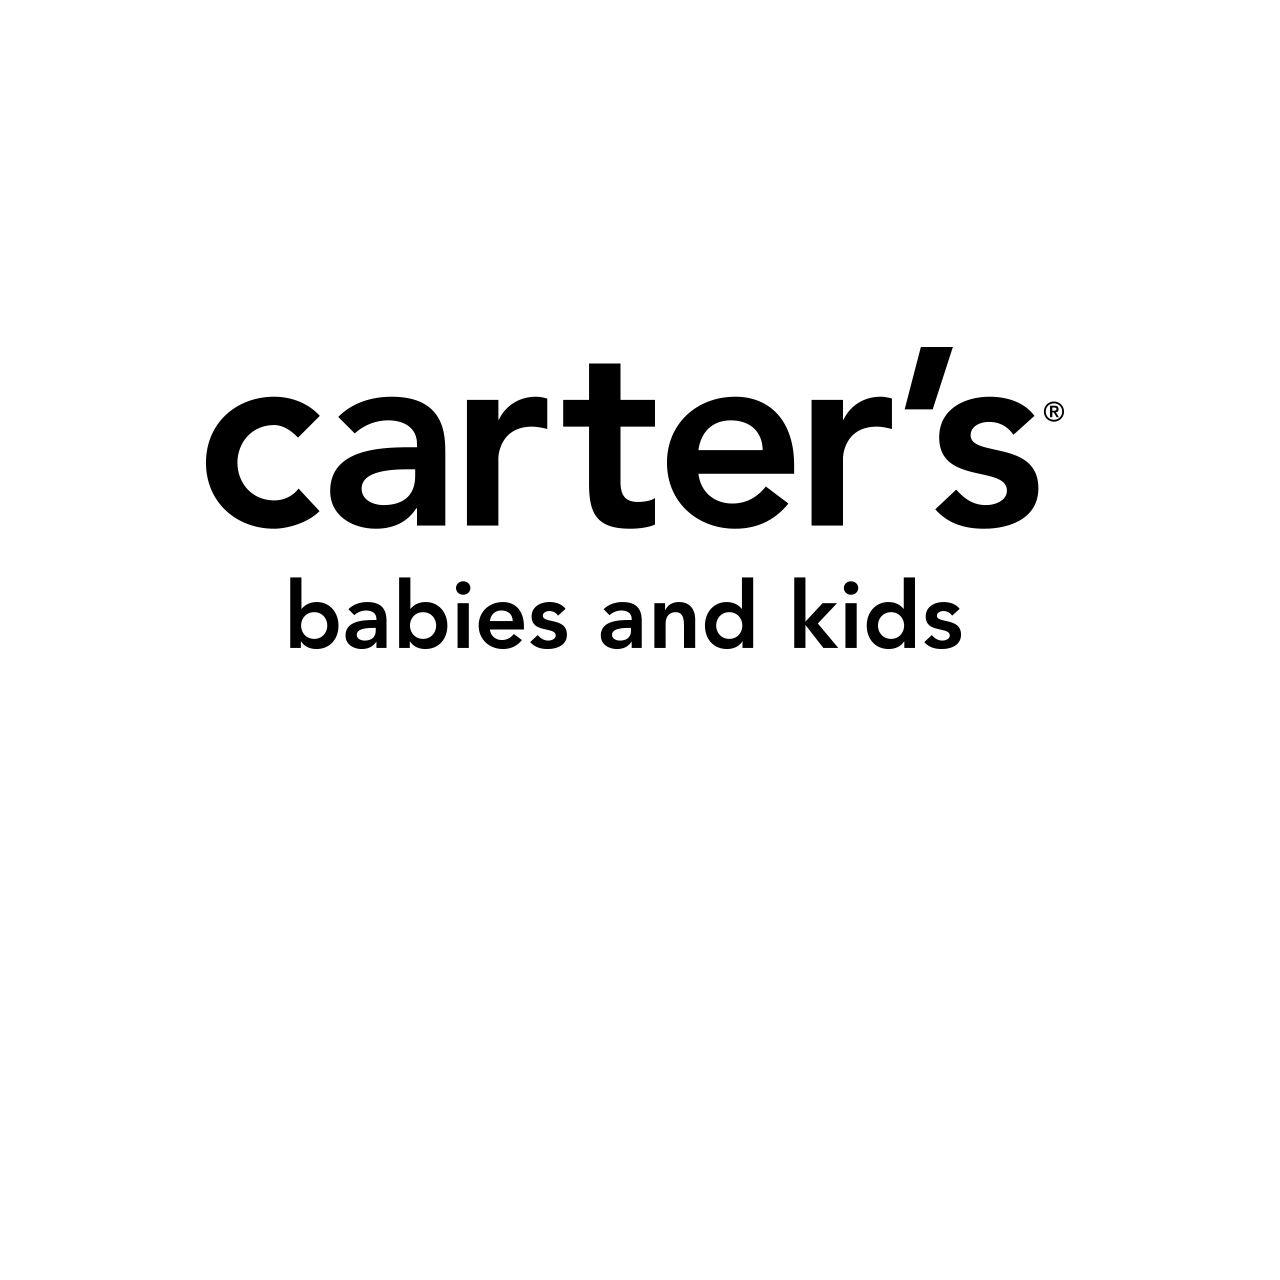 Carter's Logo - Carter's® babies and kids | The Outlet Collection at Riverwalk